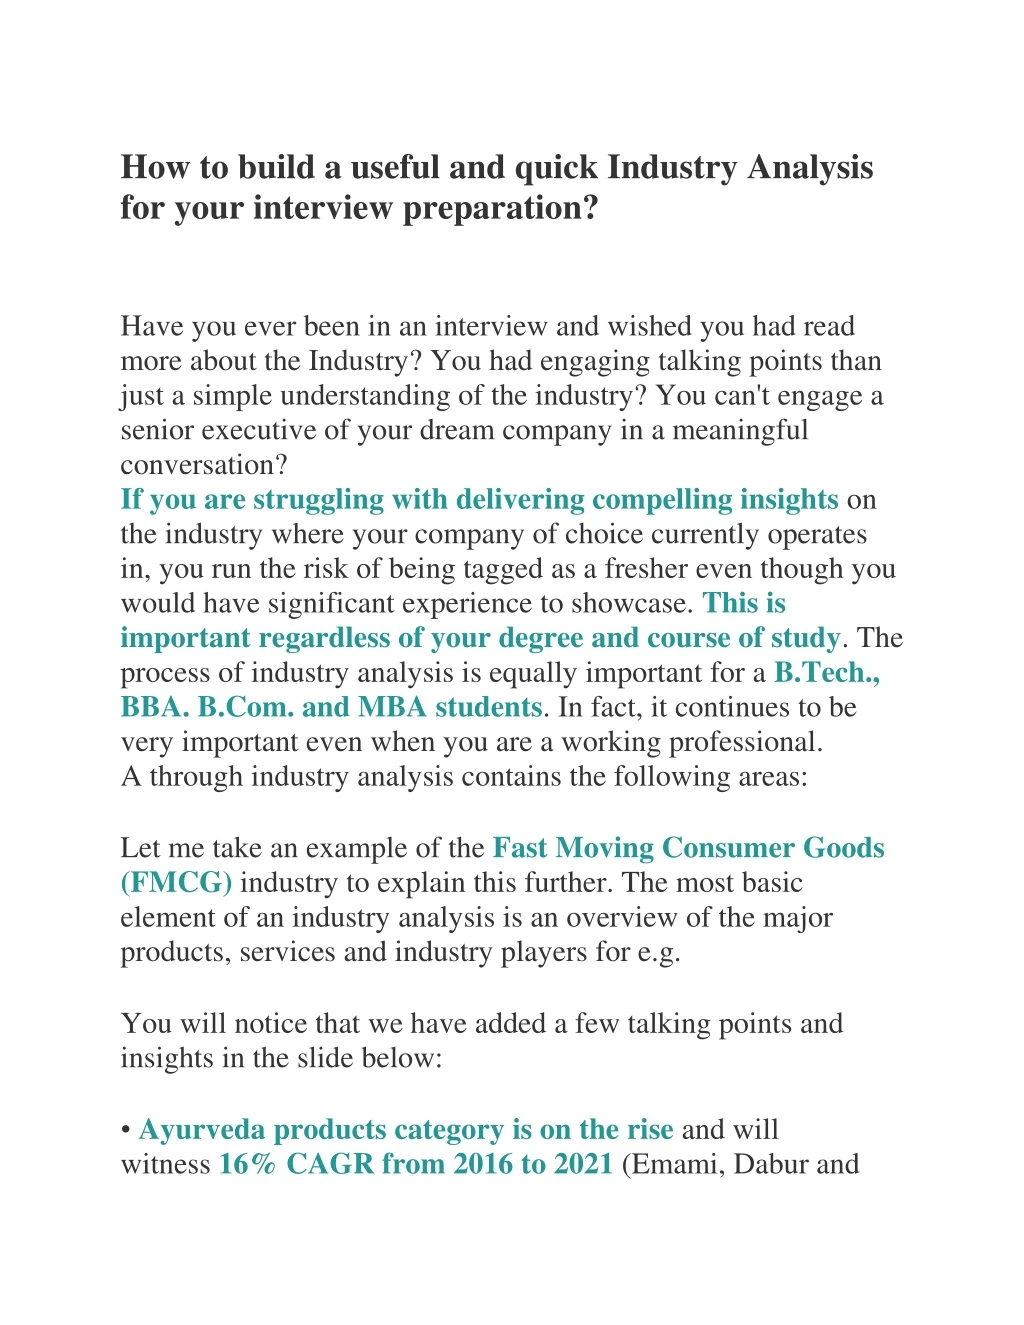 how to build a useful and quick industry analysis